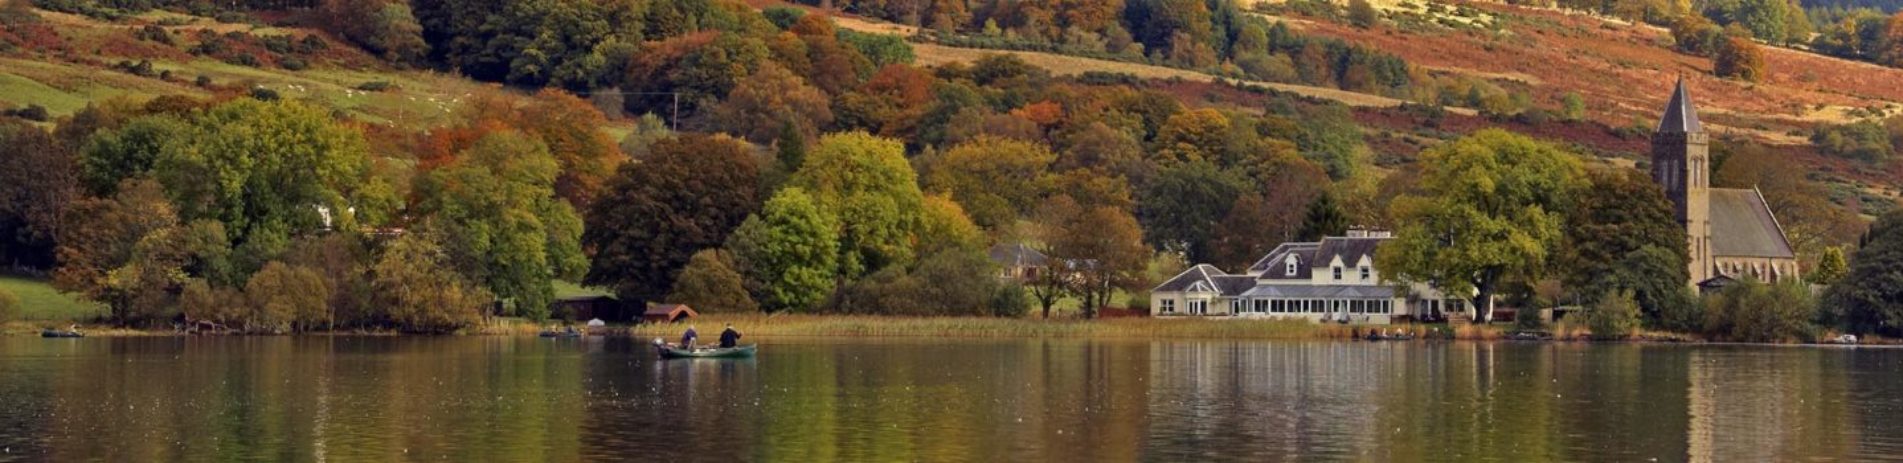 boat-on-lake-of-menteith-with-house-and-church-in-the-distance-and-autumn-colour-trees-reflected-on-the-water